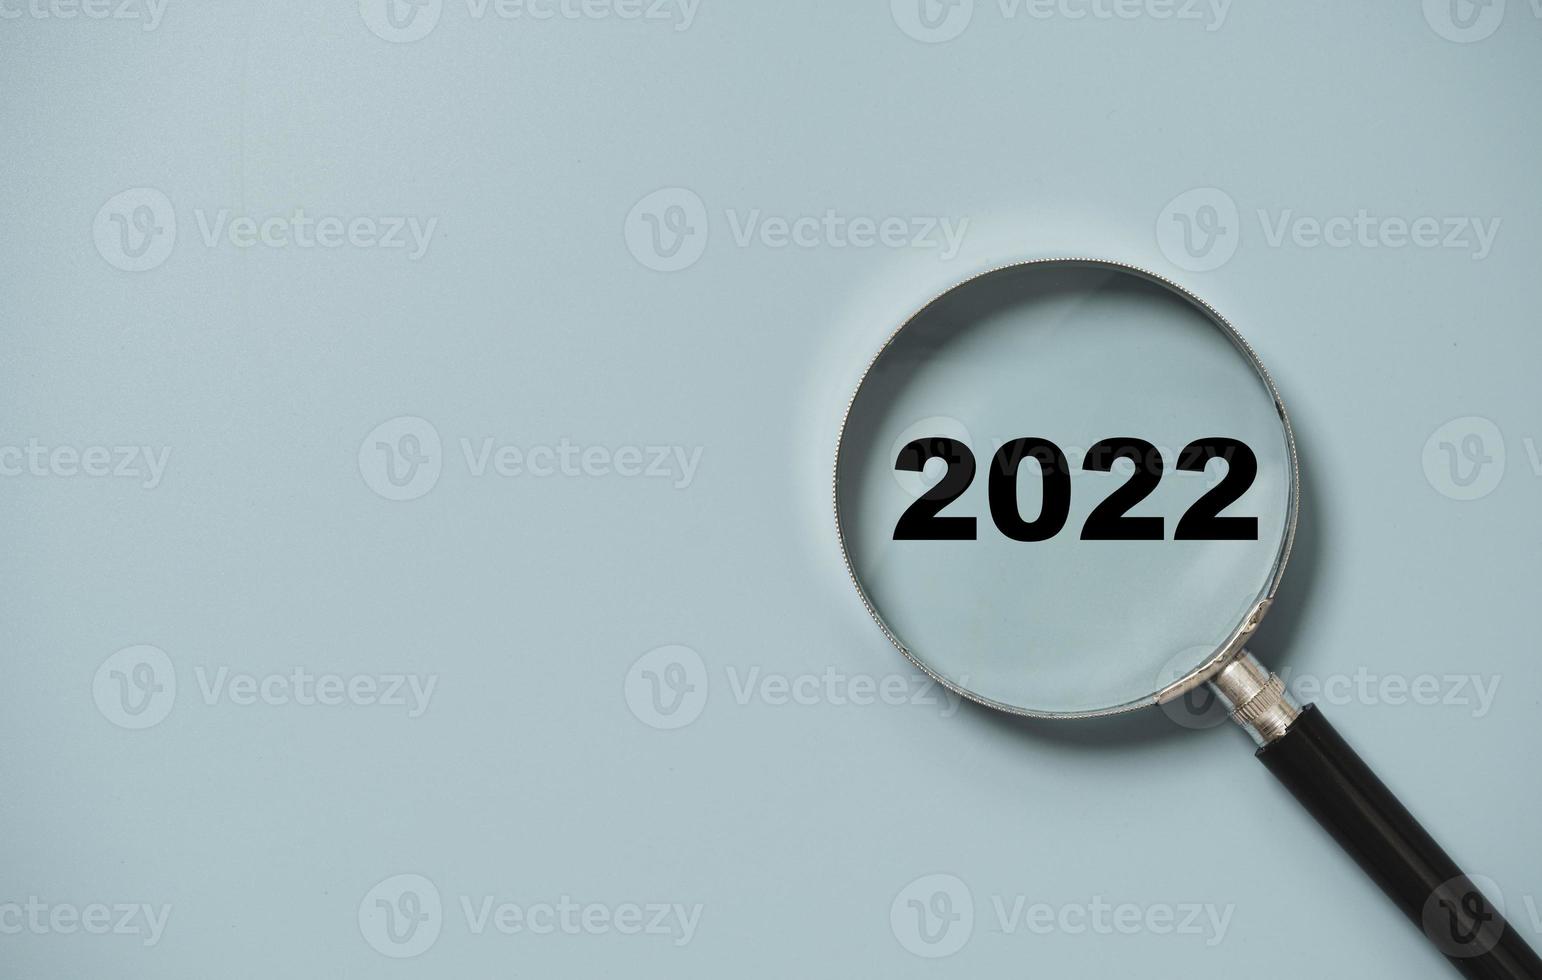 2022 year number insider of magnifier glass on blue background for focus new year business concept. photo